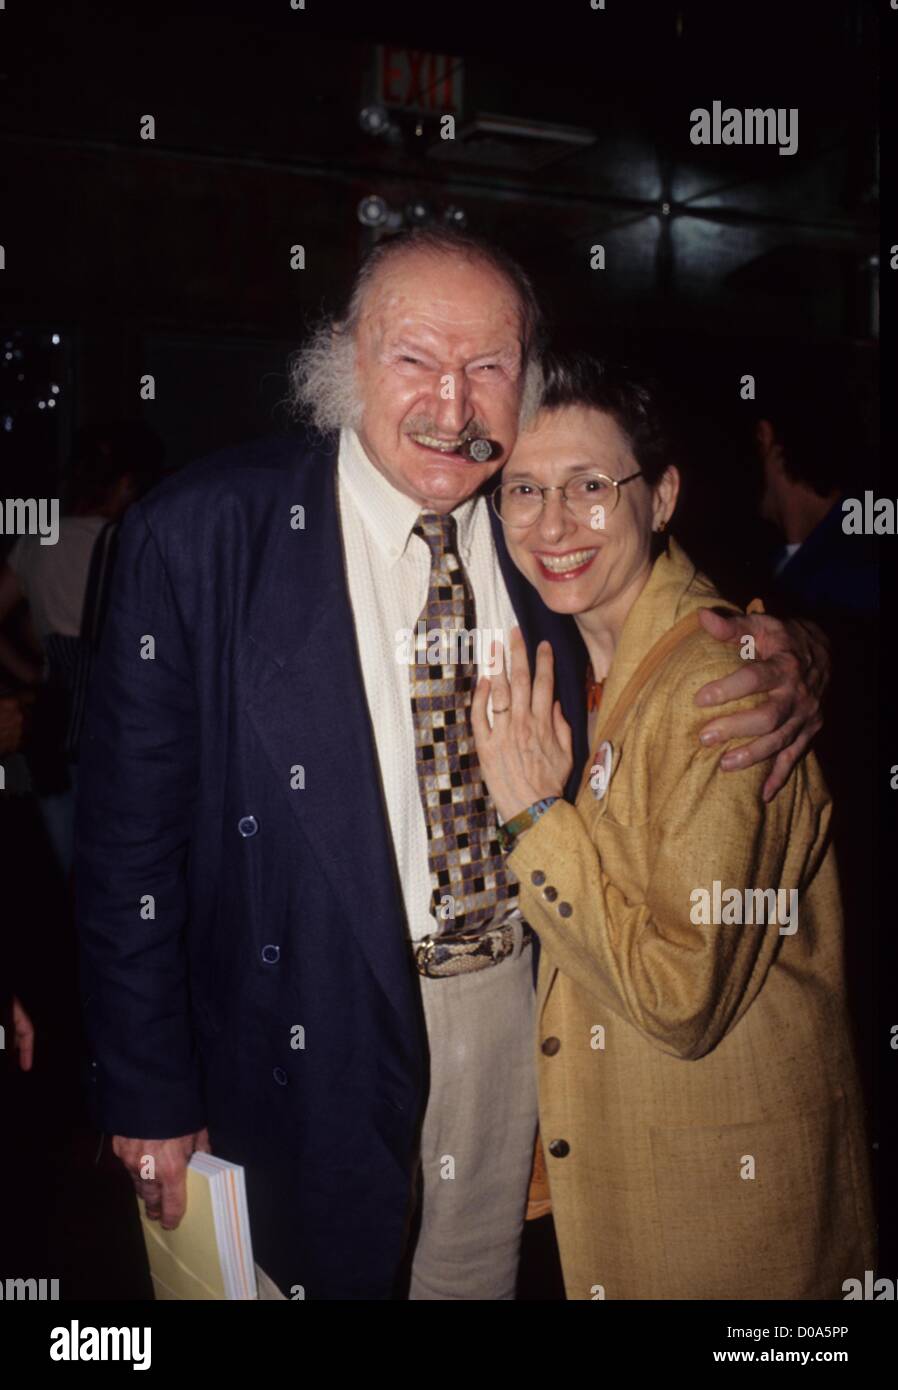 AL LEWIS with wife Karen.30th anniversary party for Screw magazine at Carbon in New York 1998.k13278bc.(Credit Image: © Bruce Cotler/Globe Photos/ZUMAPRESS.com) Stock Photo